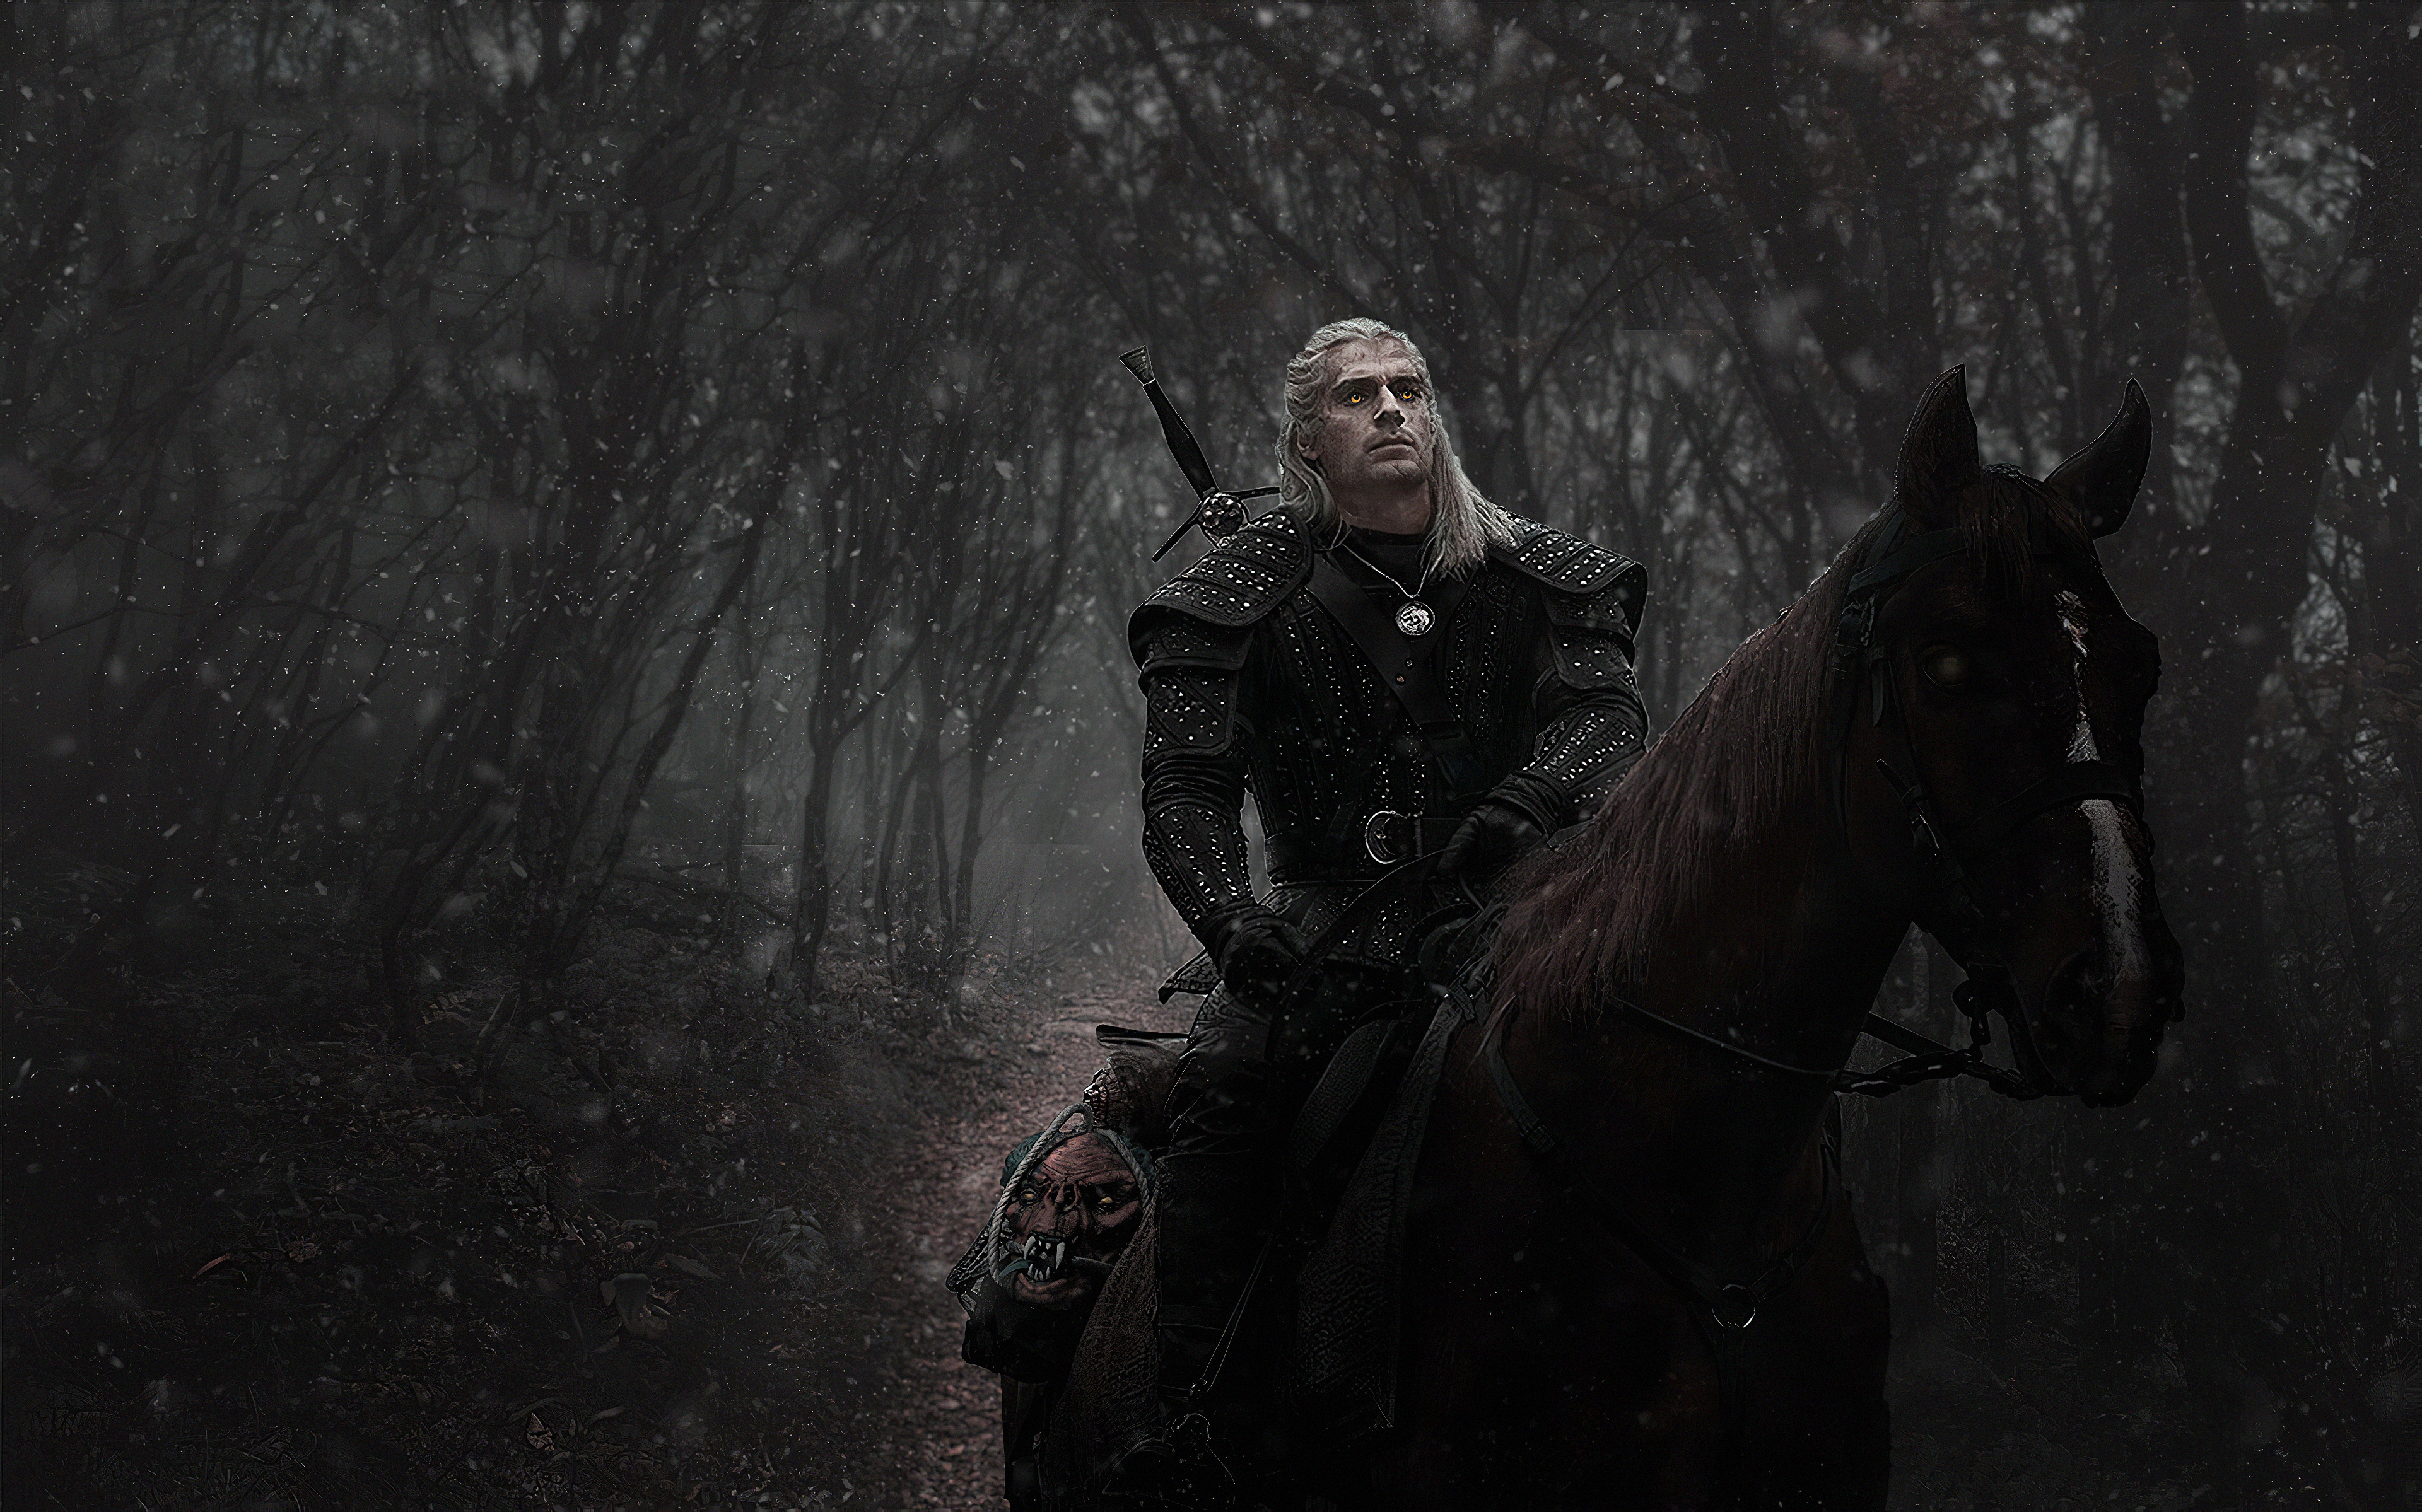 Netflix The Witcher Wallpapers